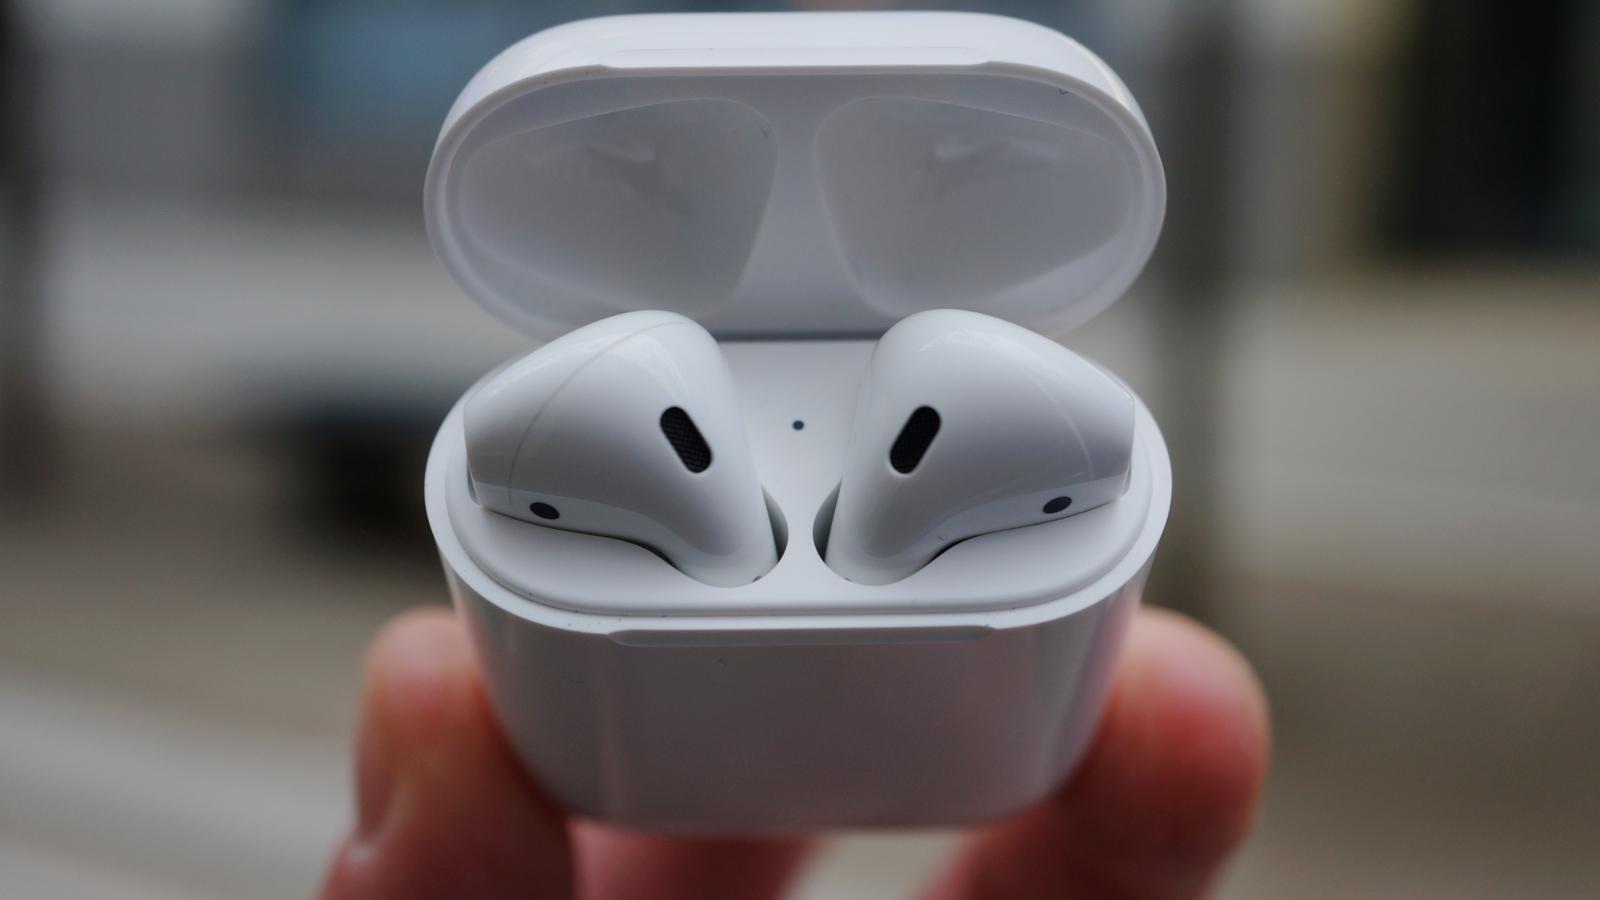 Apple AirPods lead